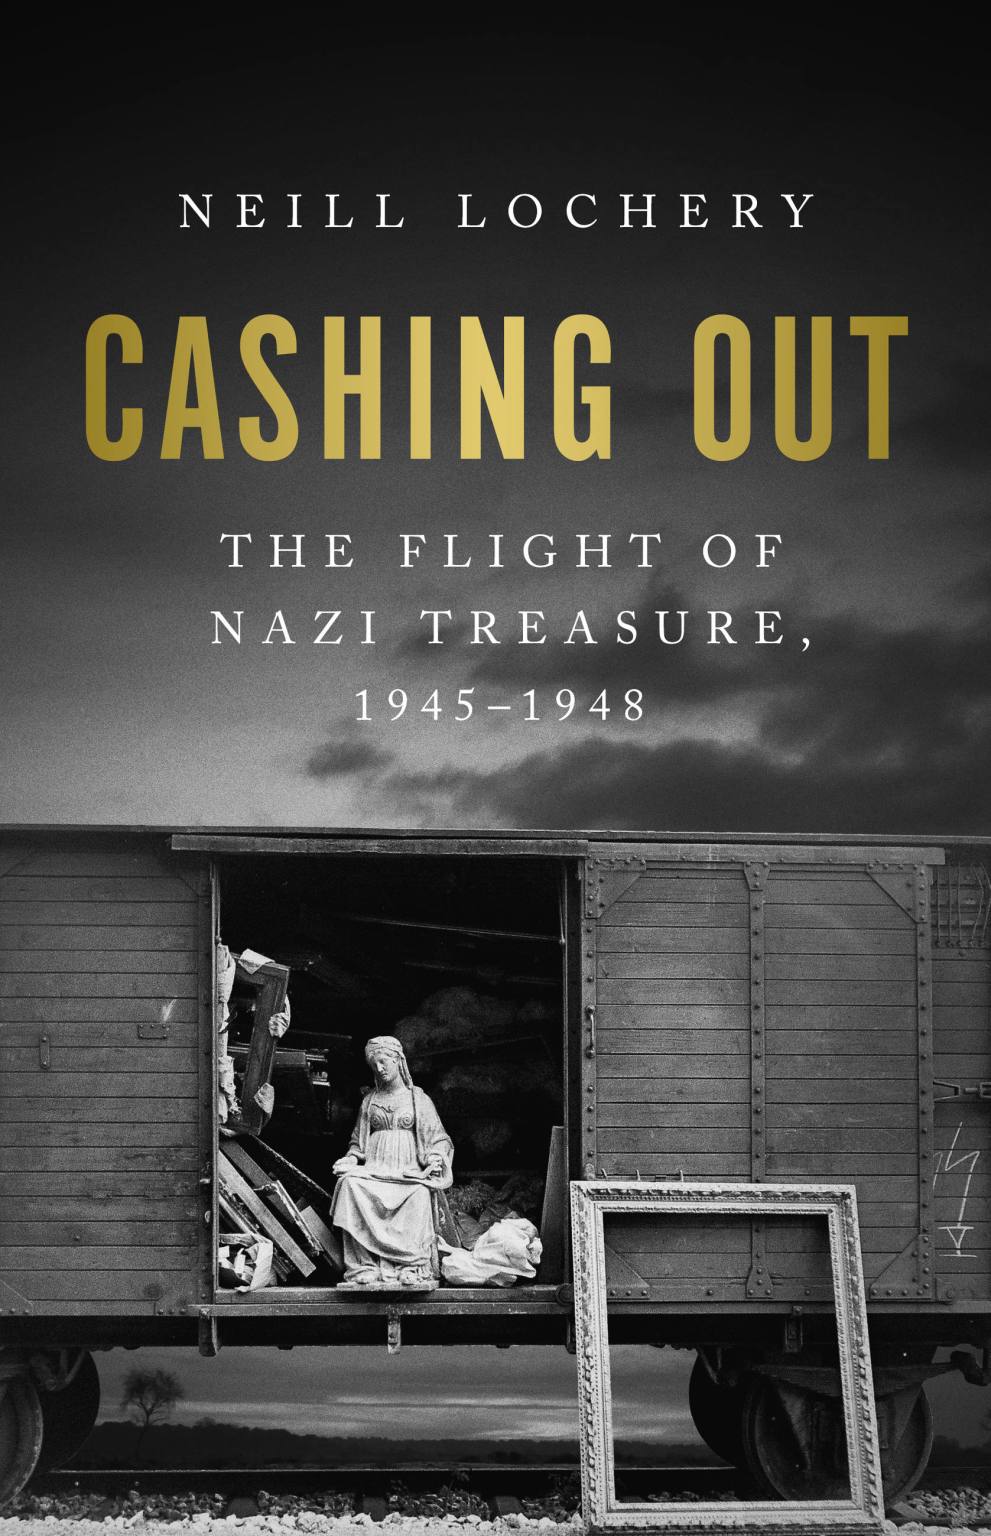 CashingOut book cover- black and white photo with yellow text